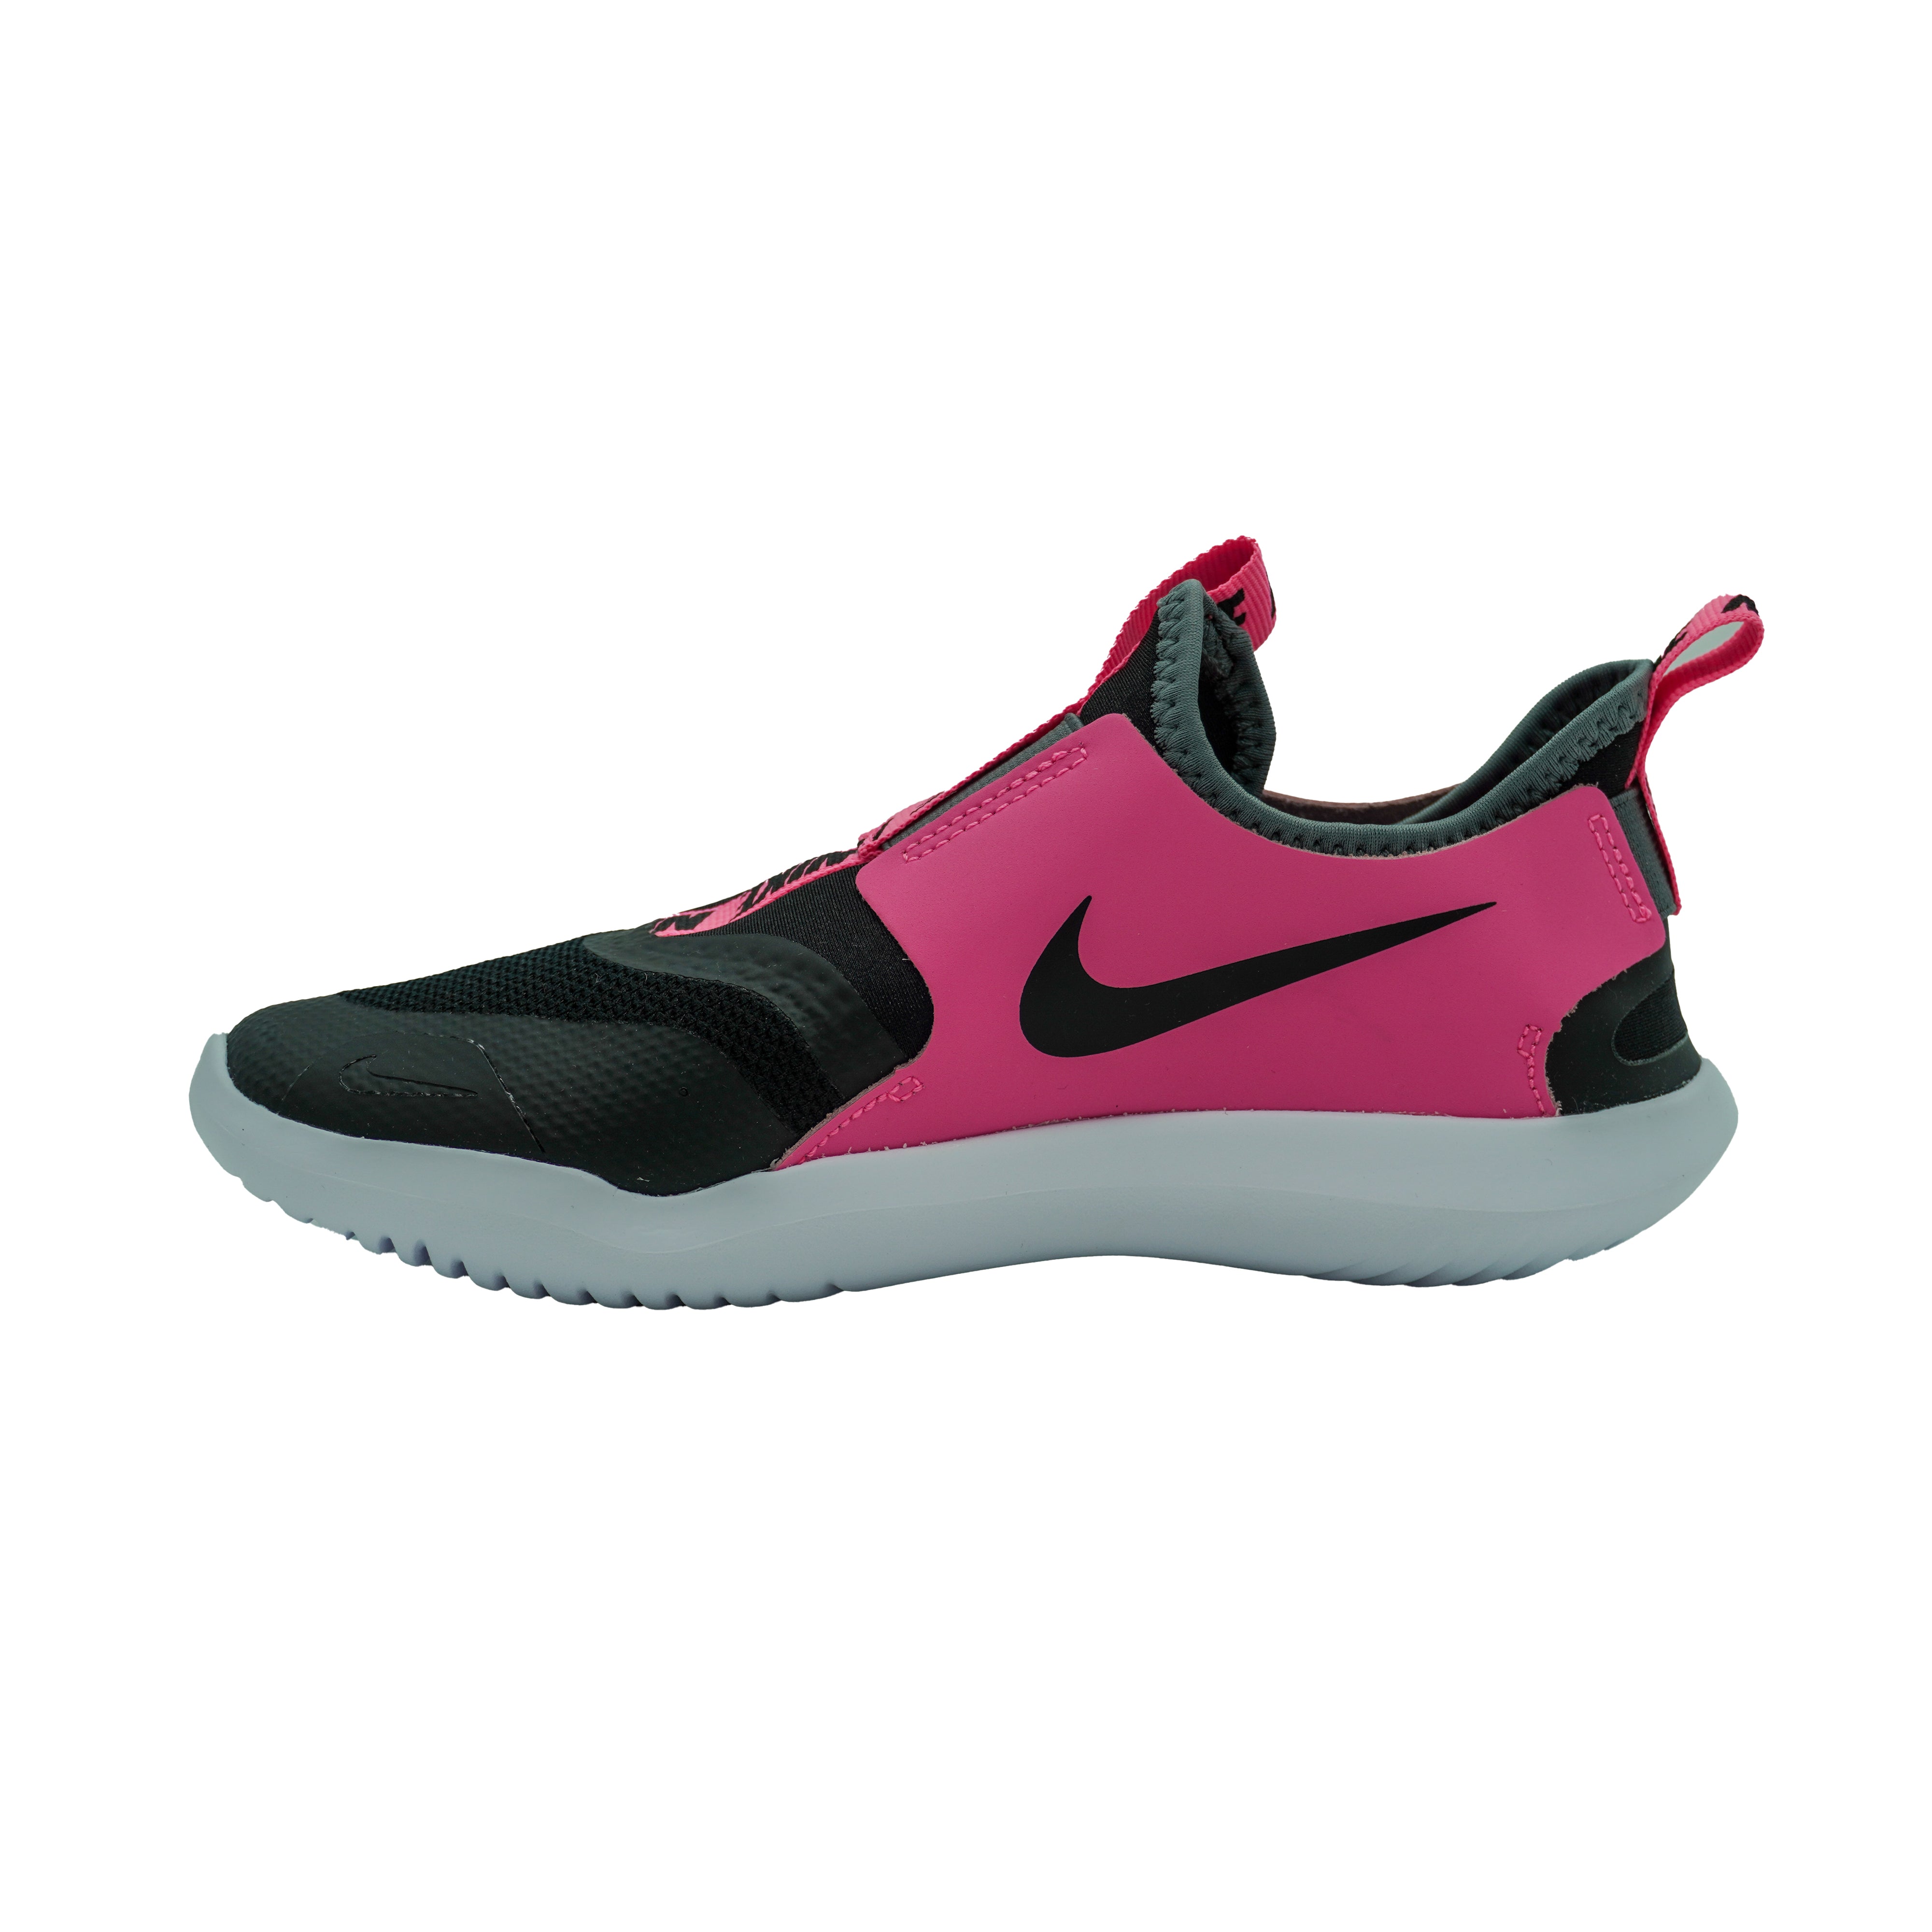 13 Best Kohl's Women's Nike Shoes for Travel 2023 - WOW Travel